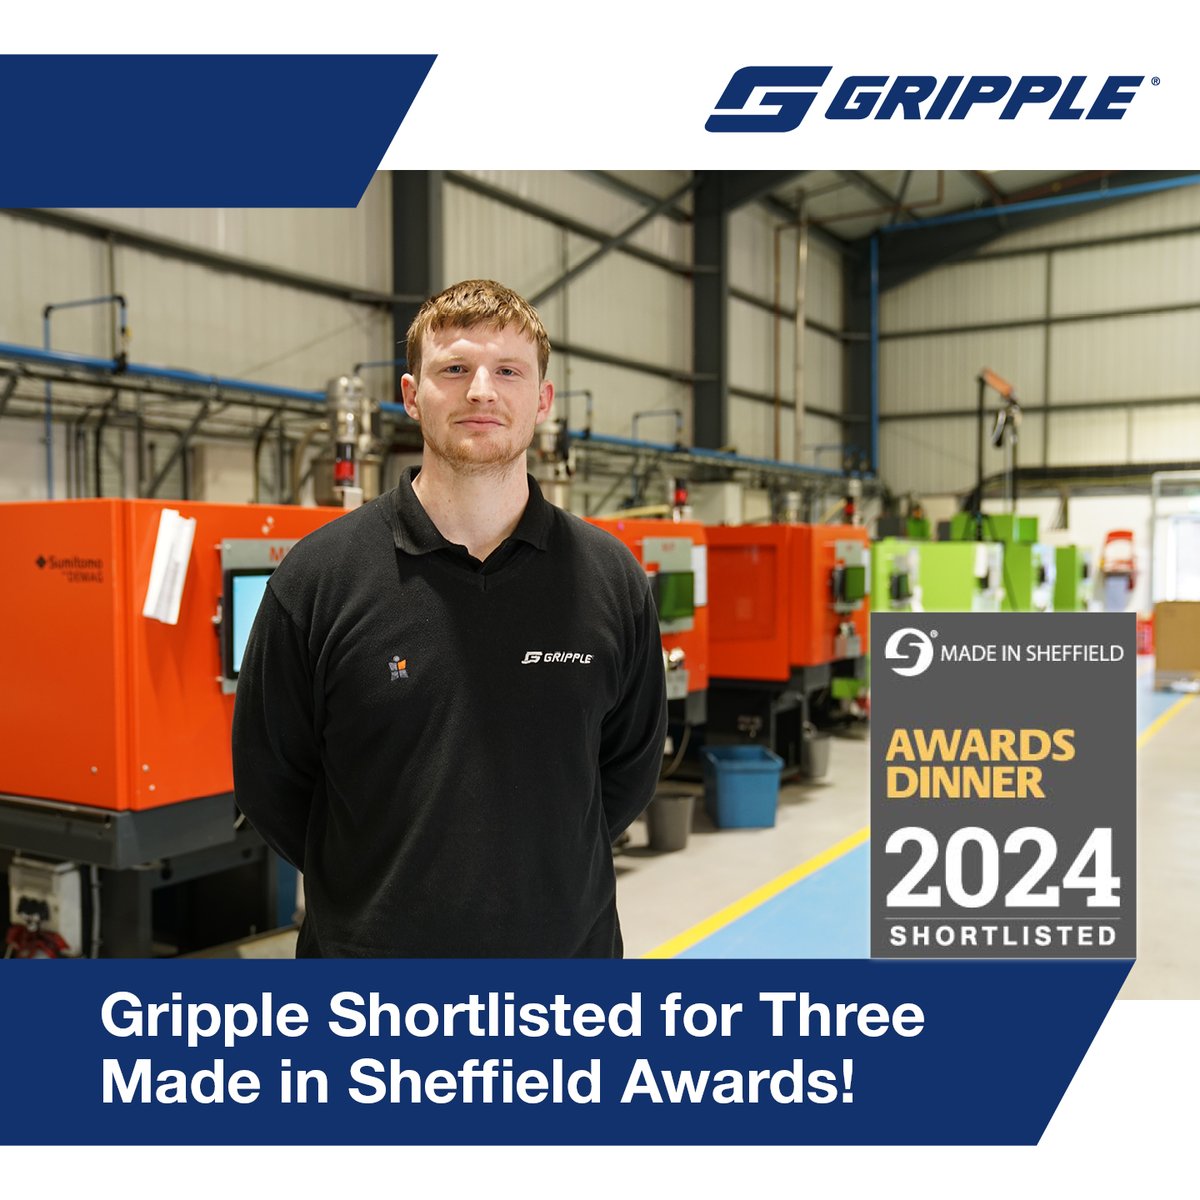 We’re thrilled to be shortlisted for THREE @SheffieldMade Awards! 🏆 Roll on May so we can find out if we’ve been successful in the Sustainable/Ethical Manufacturer, Apprentice of the Year and Made in Sheffield categories. ow.ly/e0pt50QMu1C @insideryorks